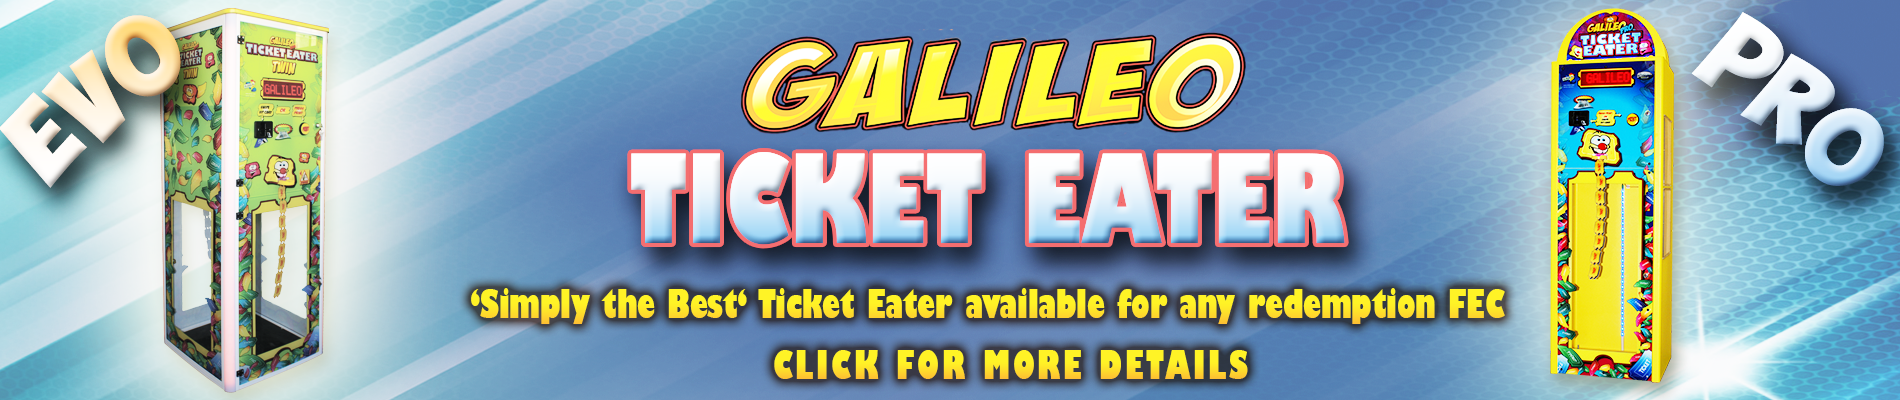 Galileo Ticket Eater Systems